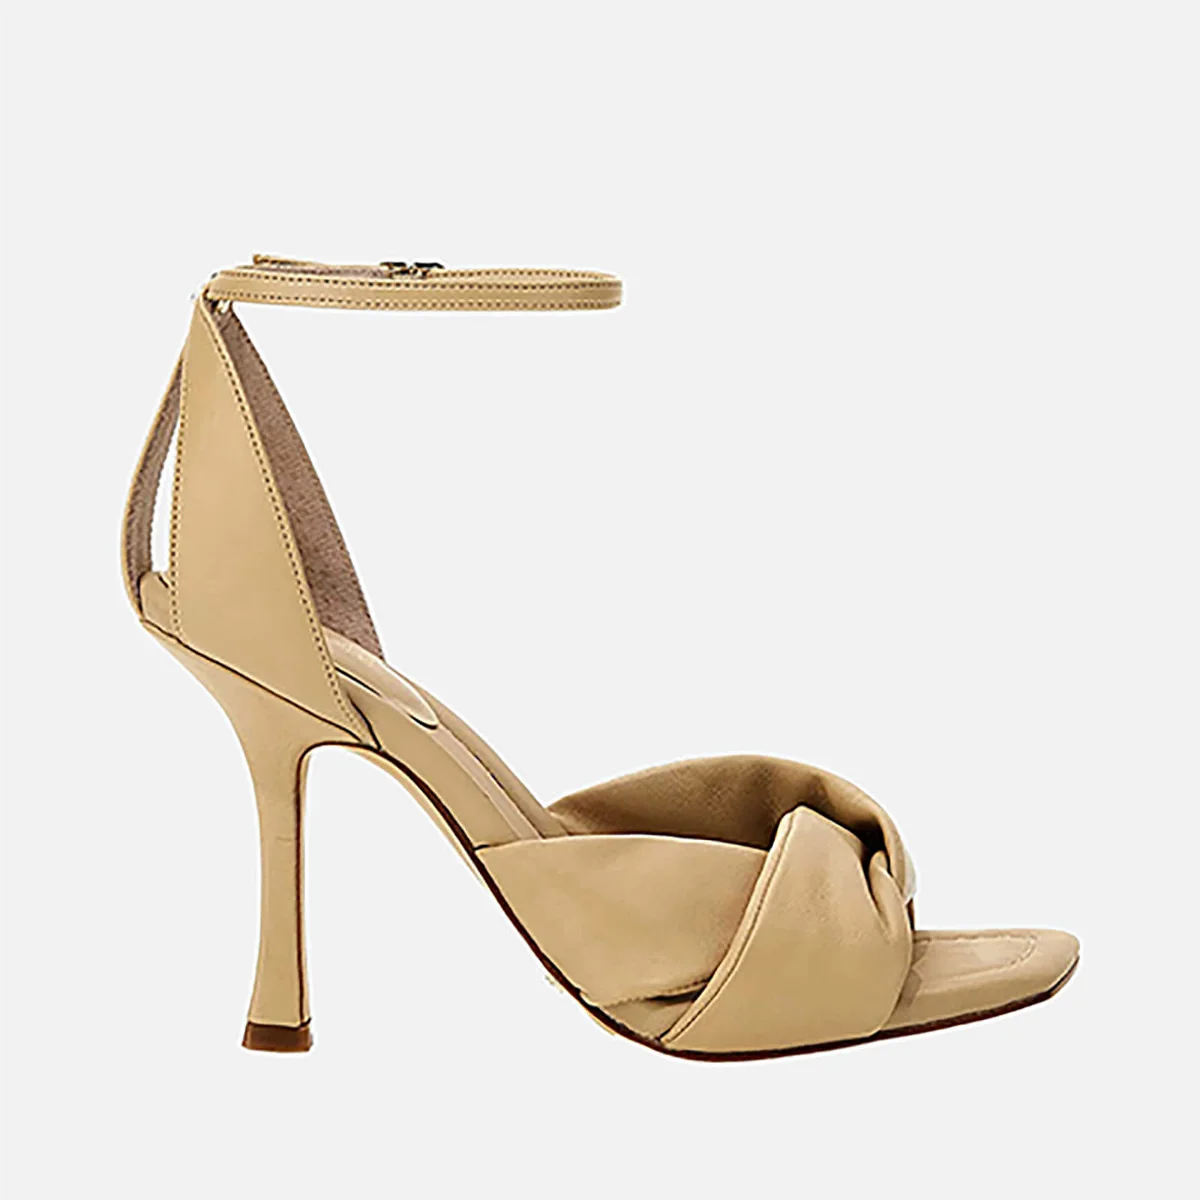 Guess Hyson Leather Heeled Sandals Image 1